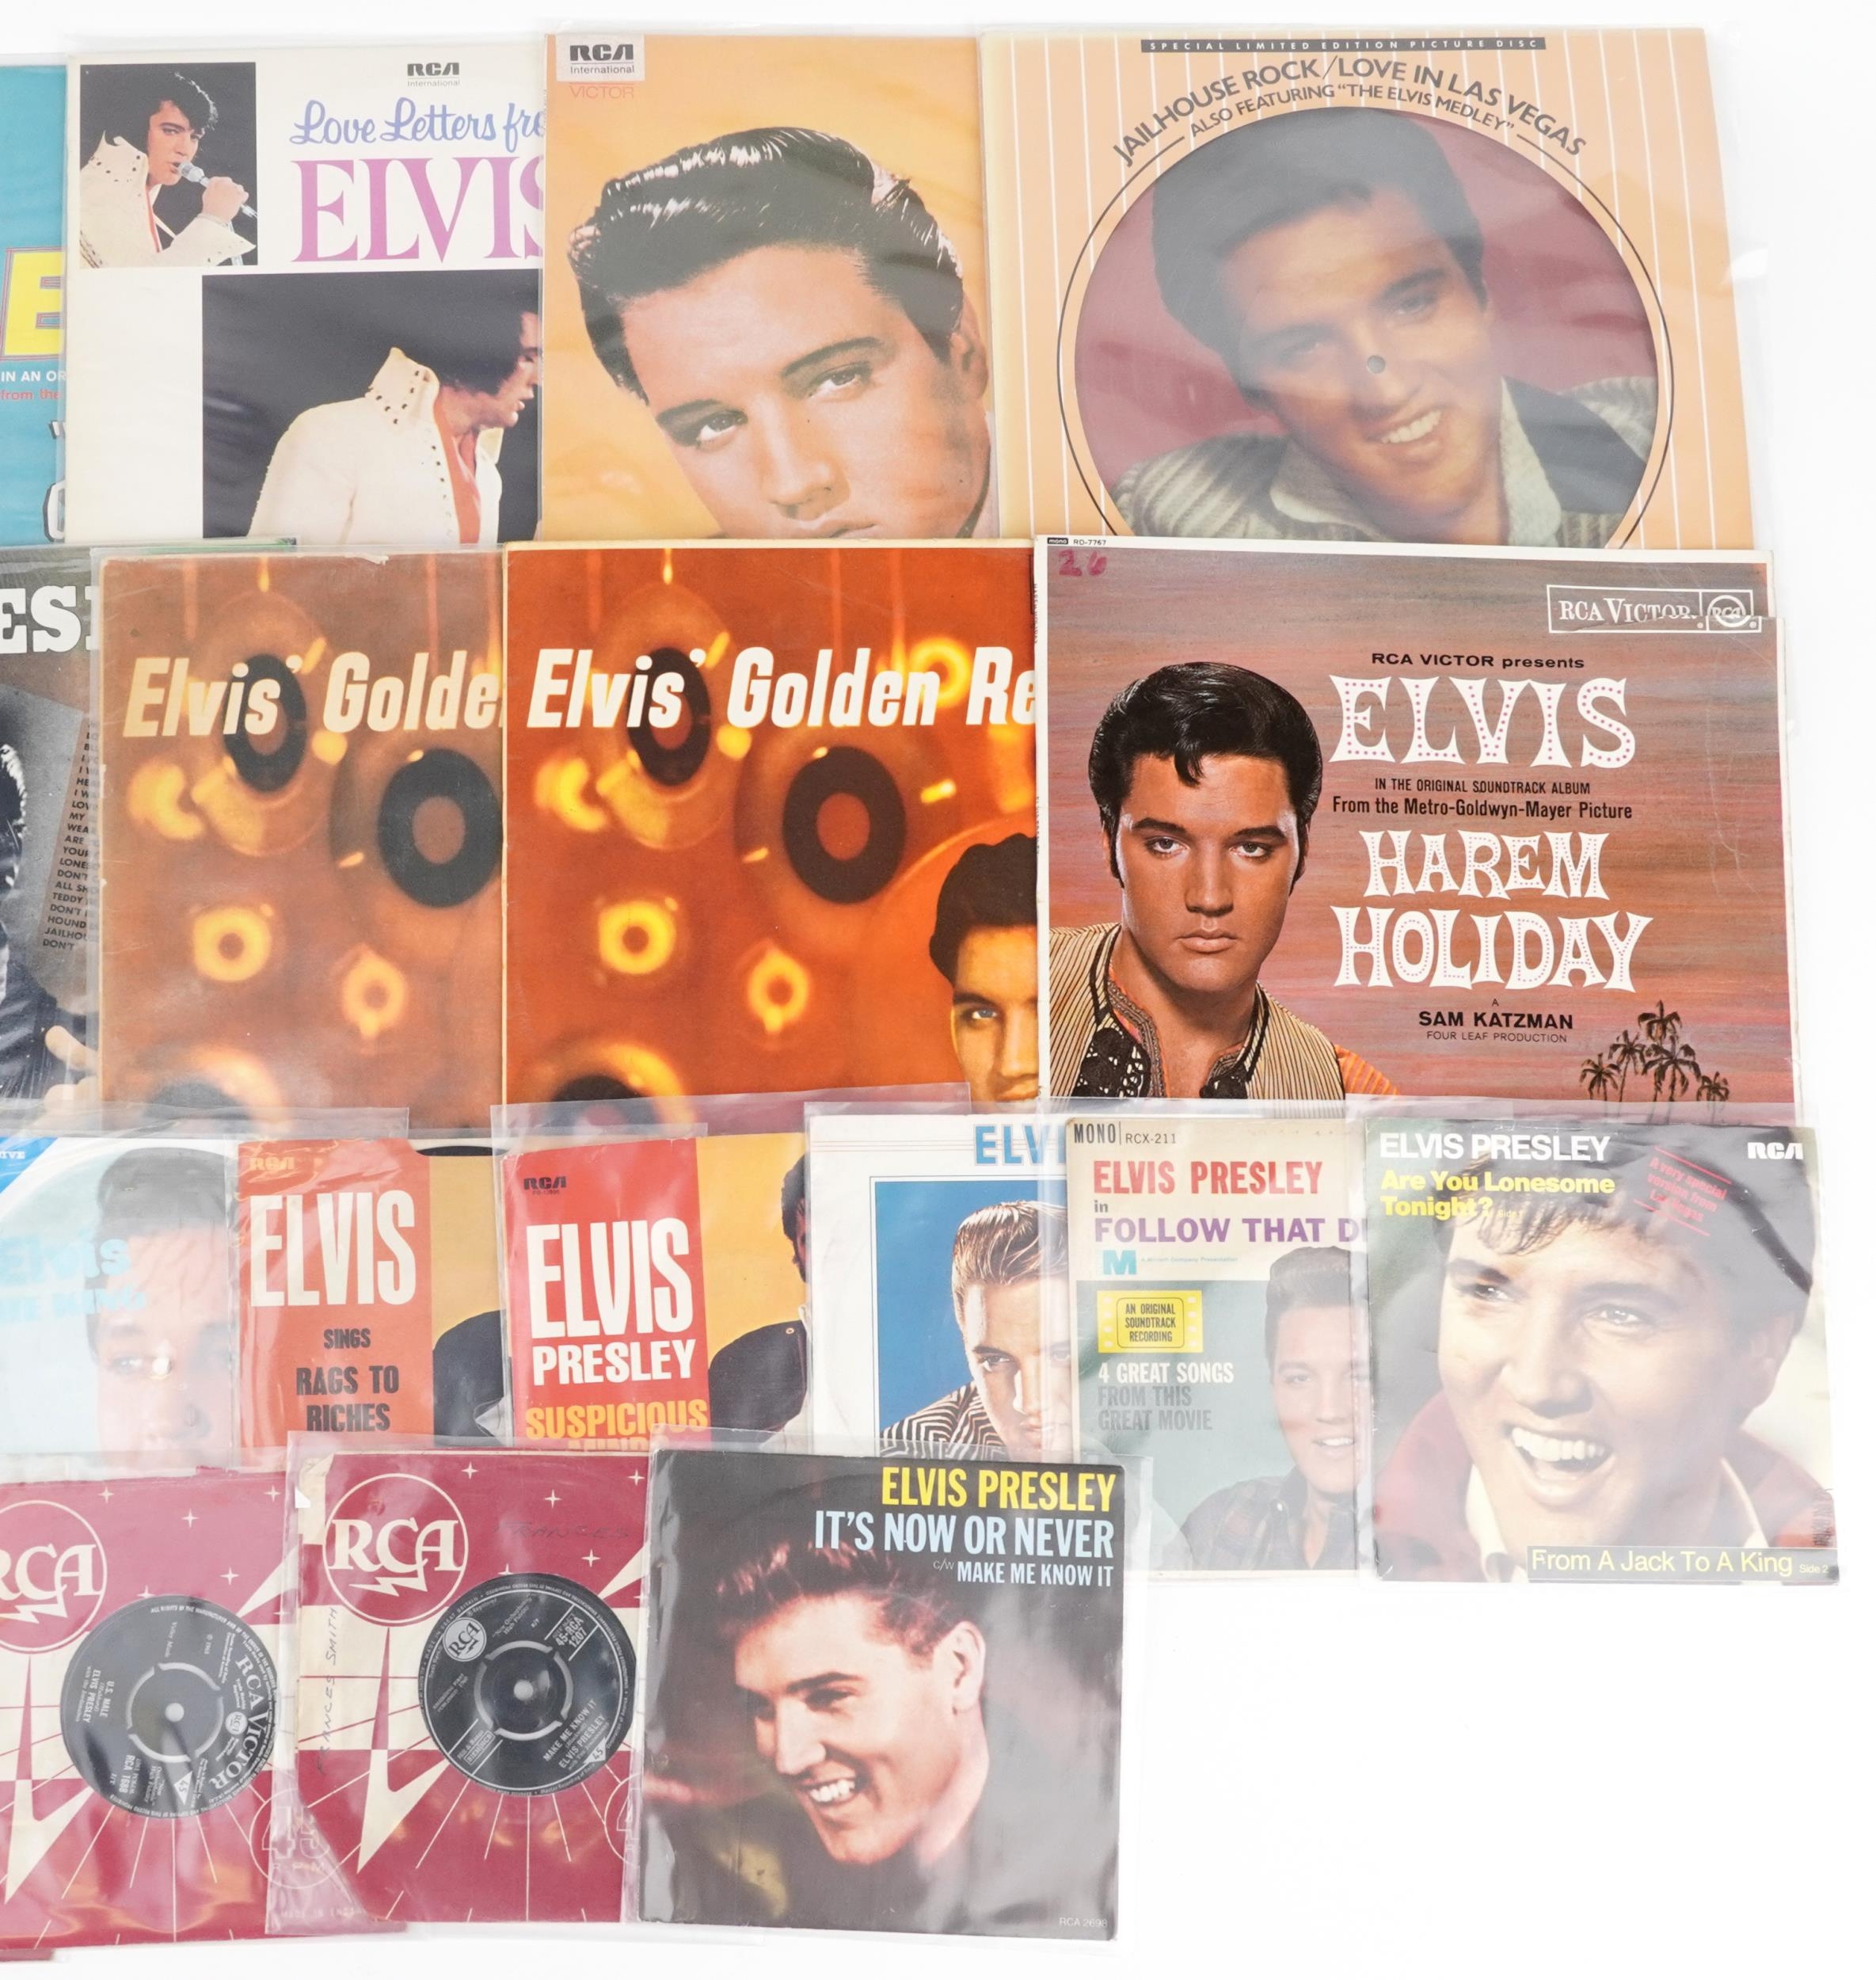 Elvis Presley vinyl LP records and 45rpms including Kissing Cousins, Hawaii USA and Golden Records - Image 3 of 3